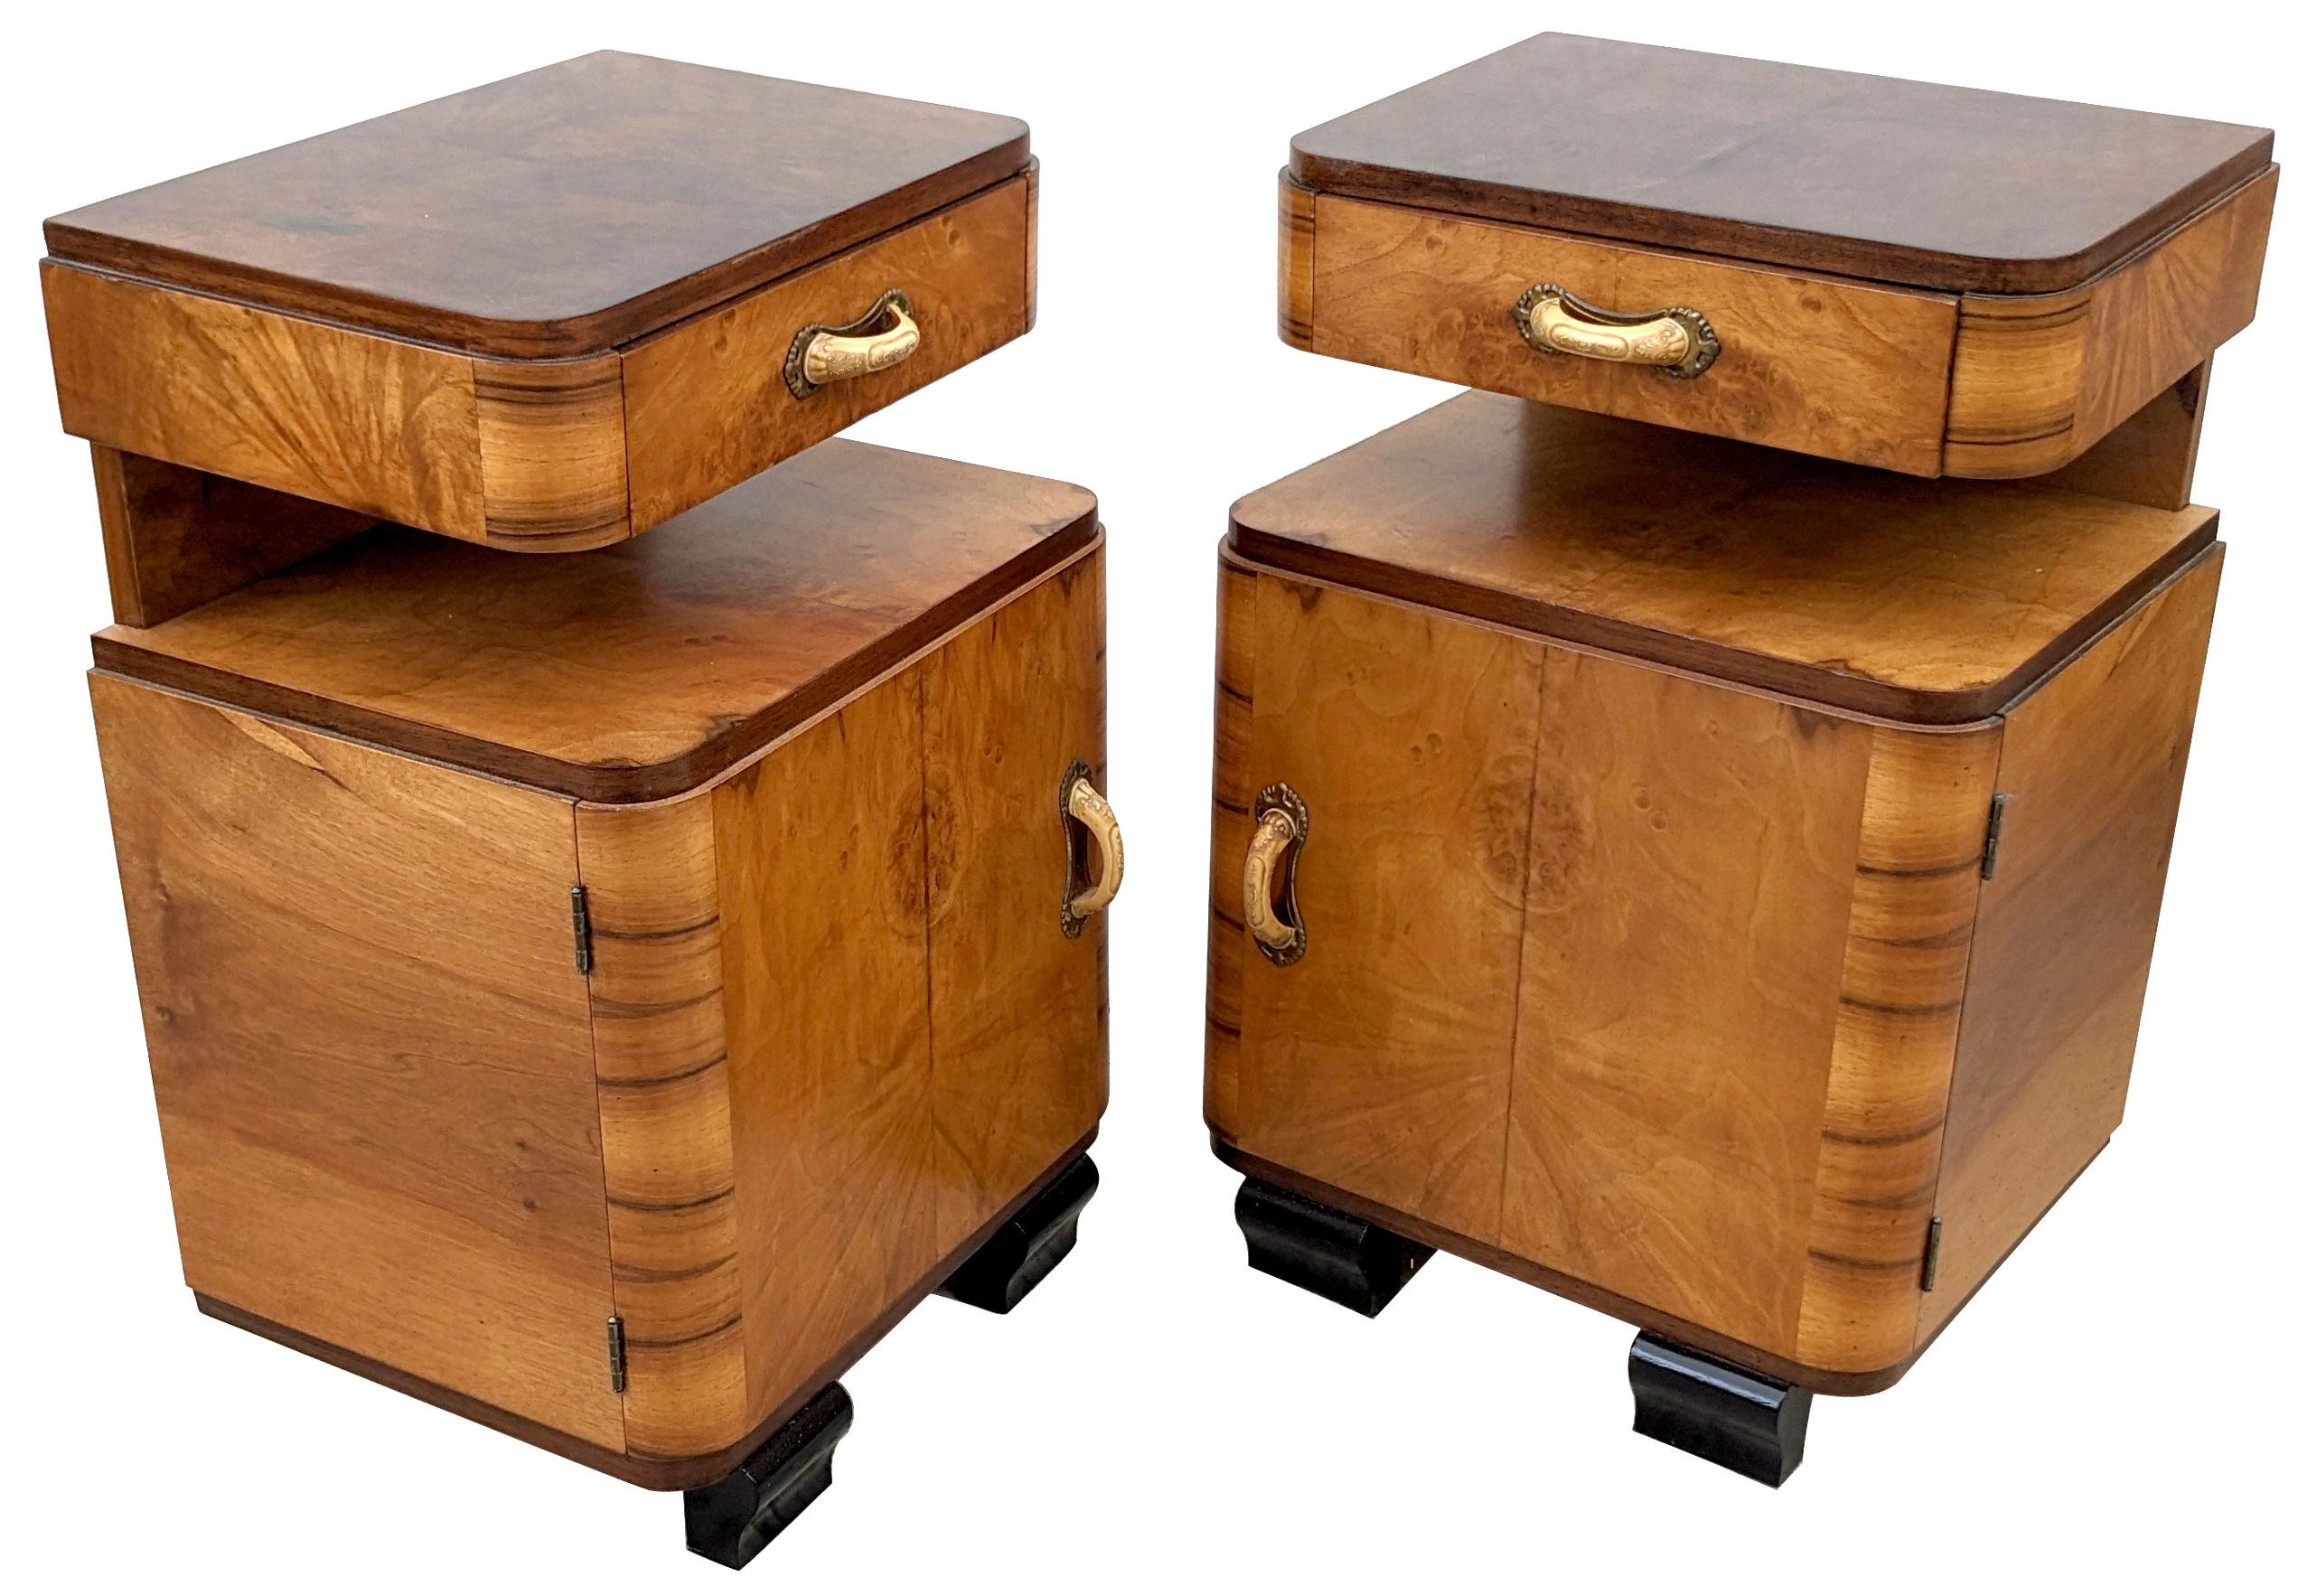 A rare opportunity to acquire a wonderful pair of matching and original Art Deco bedside tables. Originating from Italy and dating to the early 1930's they fill both the highly desired shape of Art Deco at its best and Blonde walnut which so easily